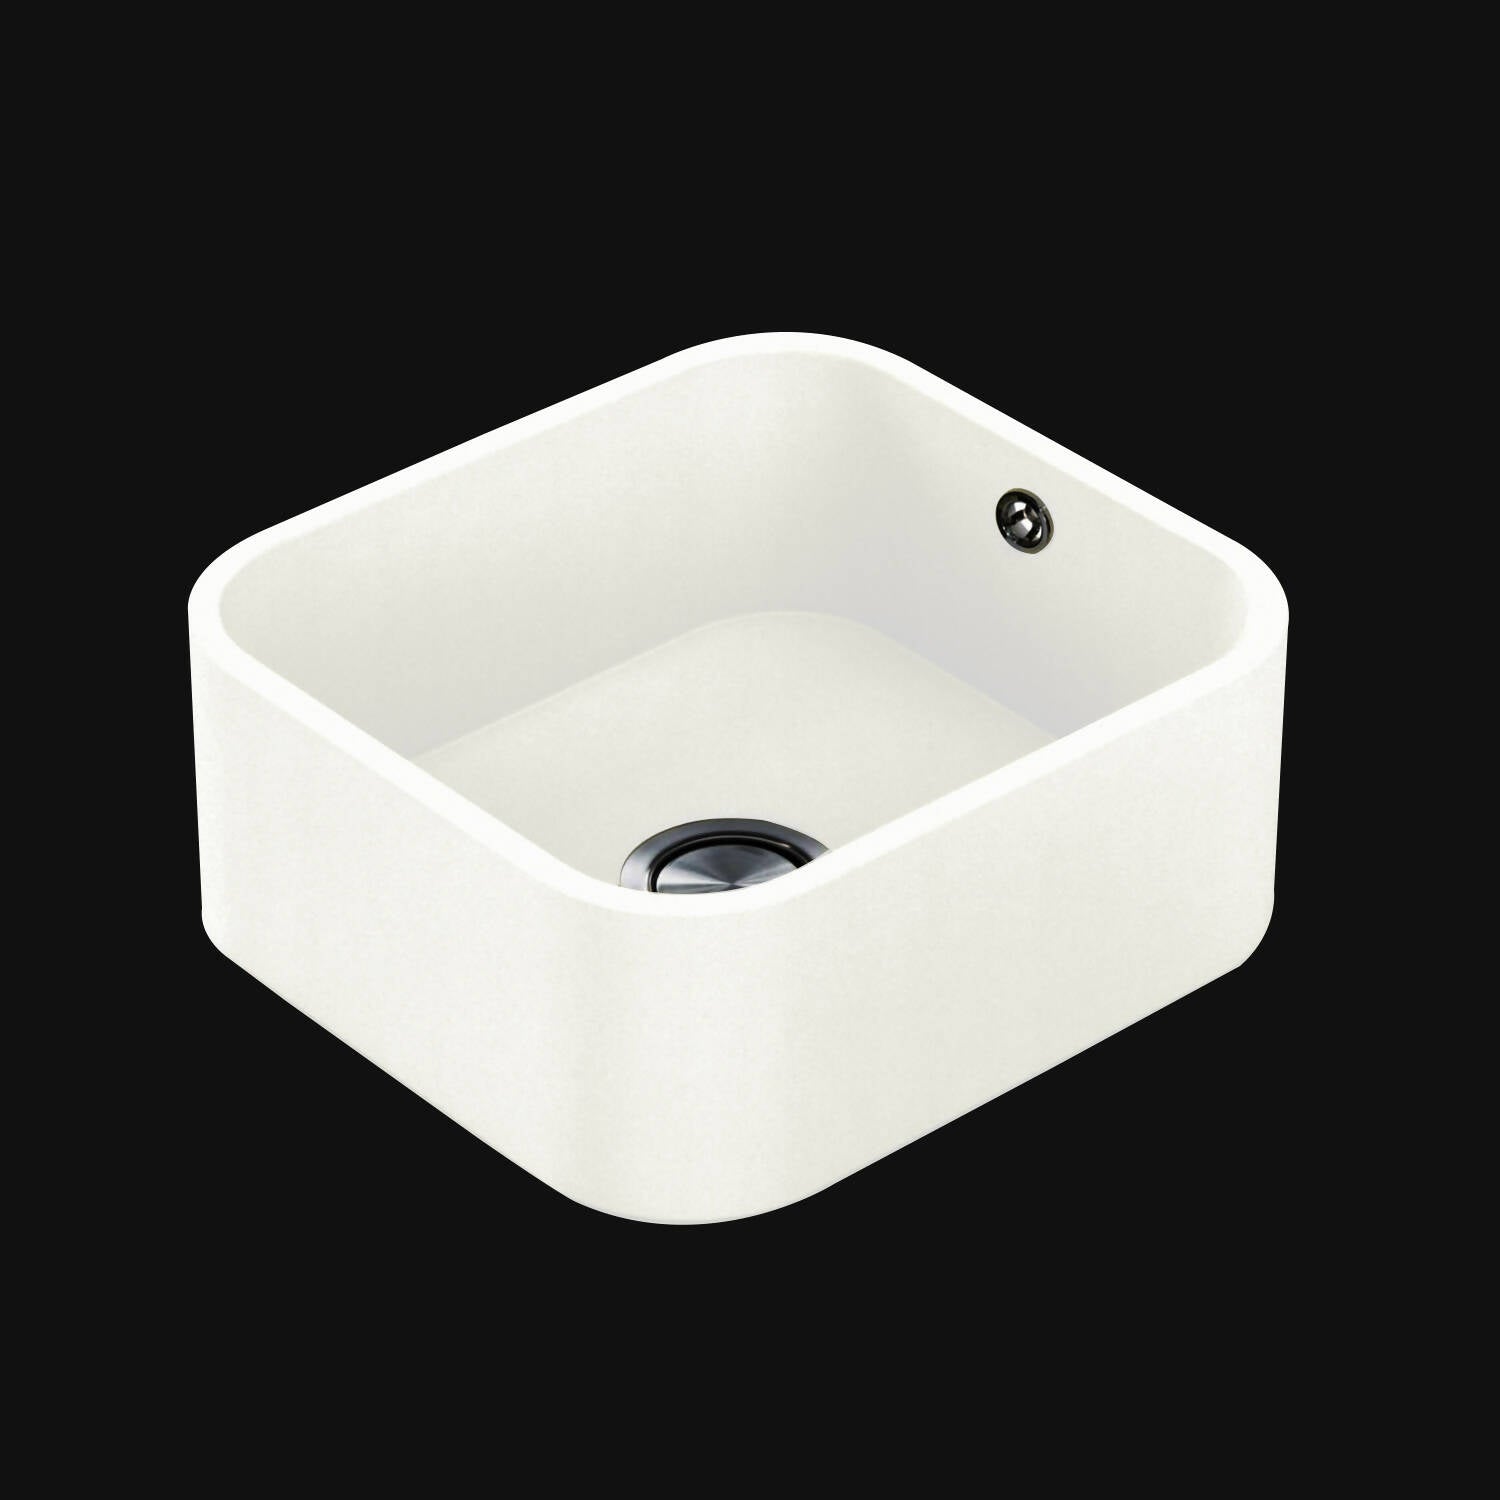 ICONIC WHITE INTEGRITY SINK,Stone Sink,Cosentino Sink,www.work-tops.com